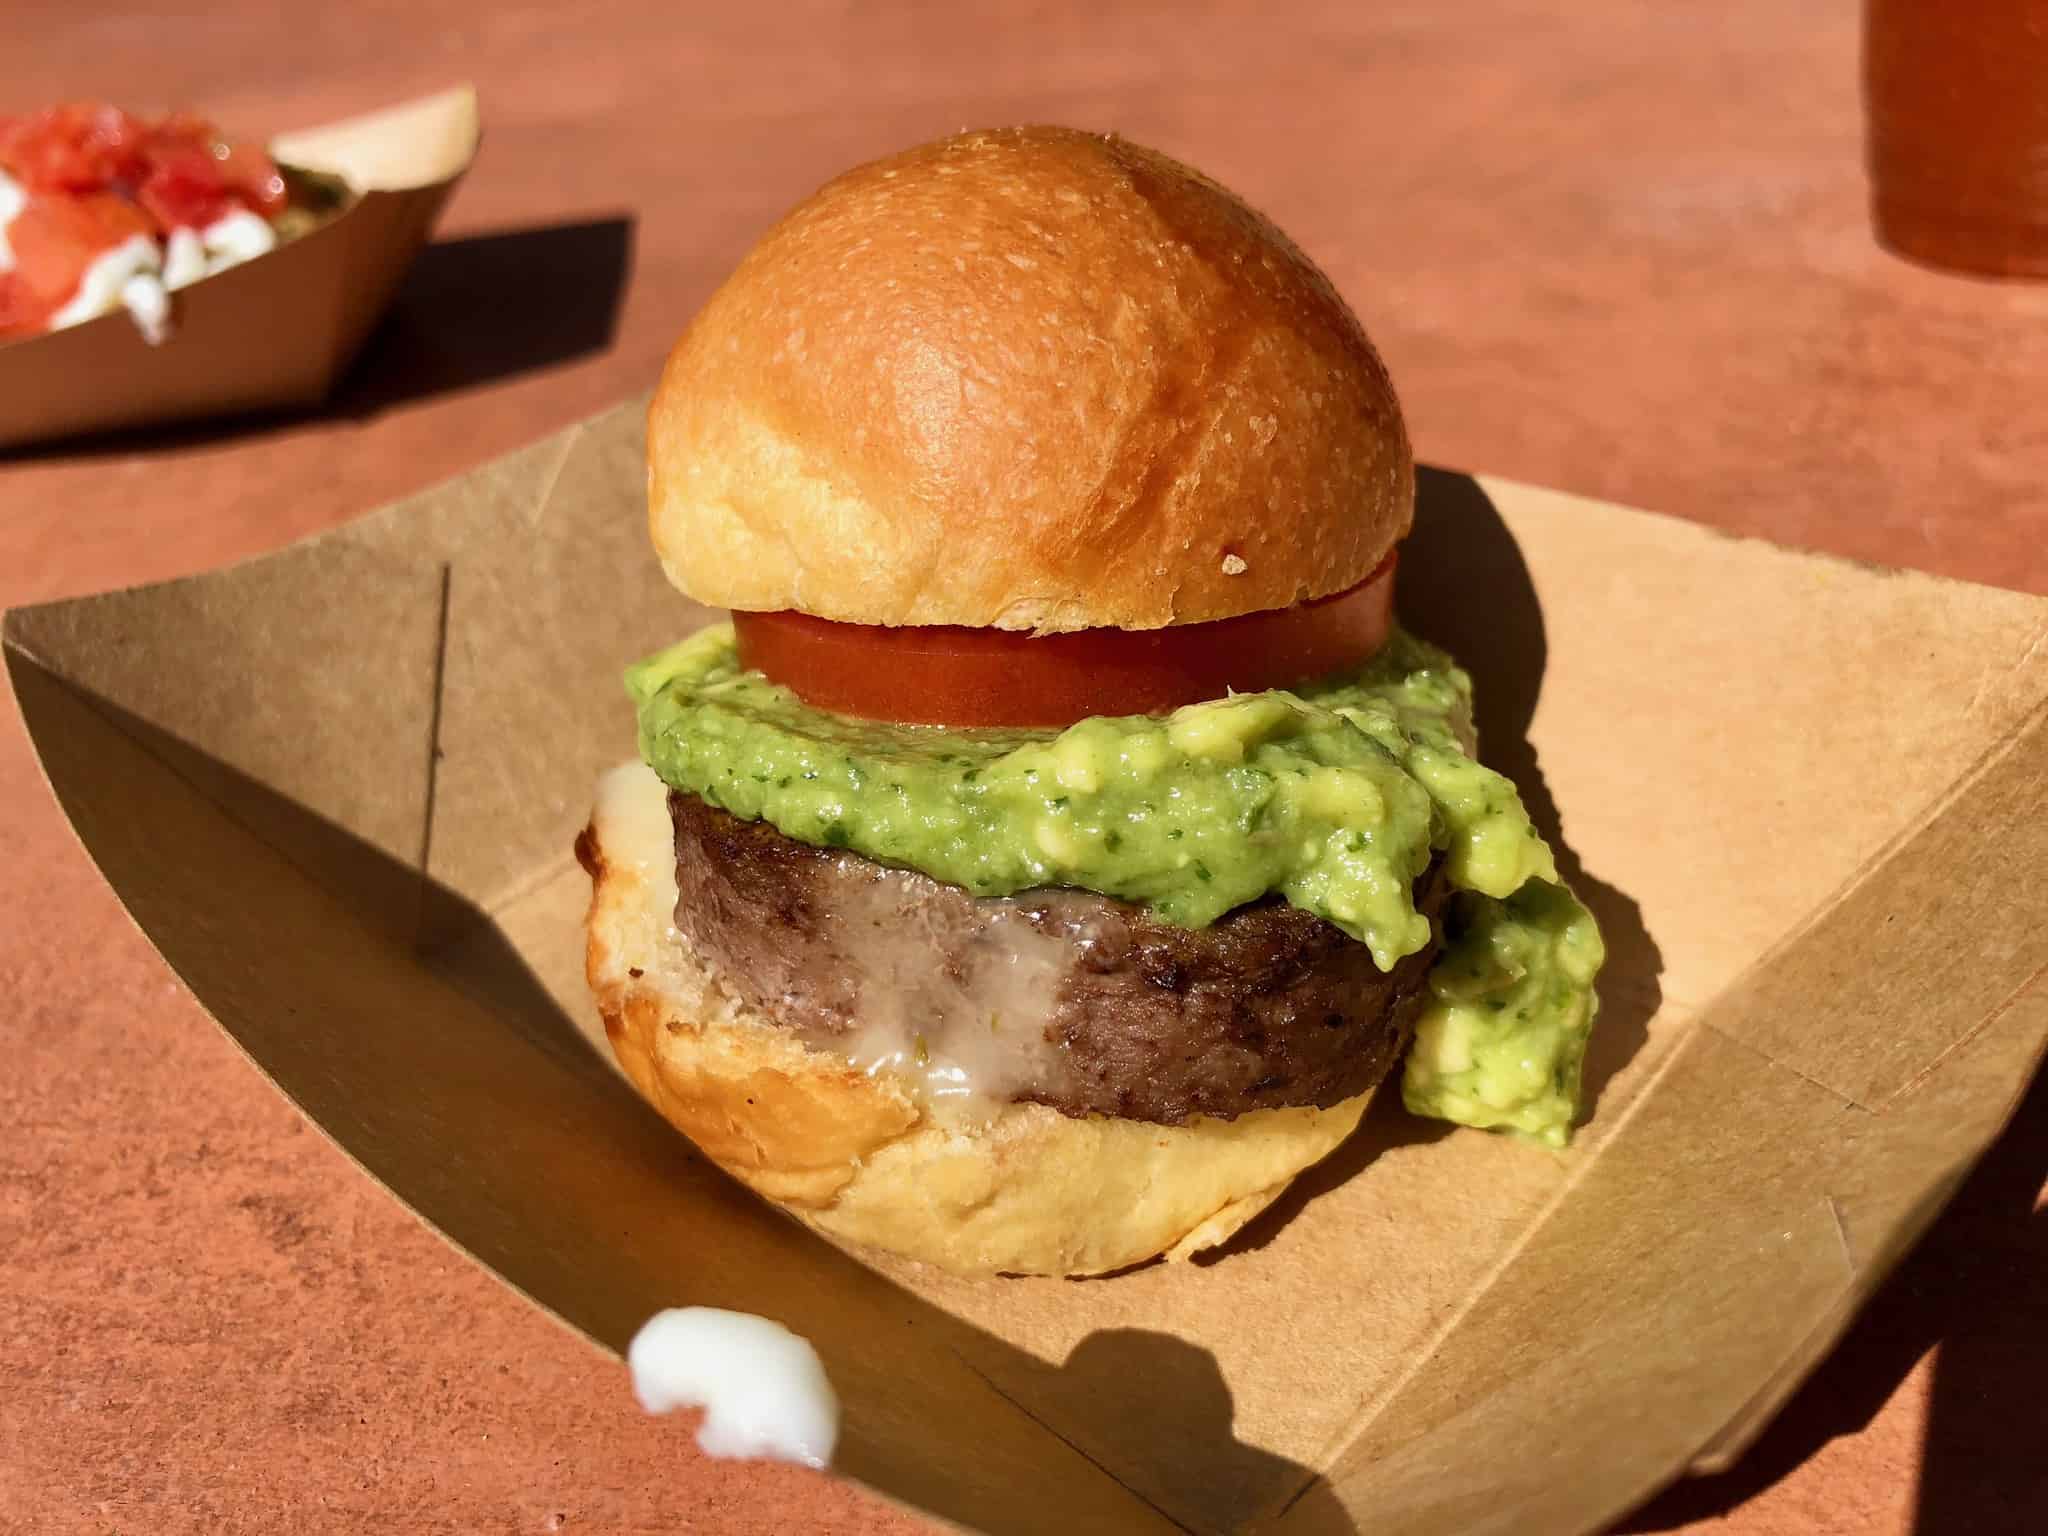 While rather tasty, this slider is rather small for the price. It’s also not that inventive – I’ve had guac on a burger many times. There are many other great dishes at the festival we’d recommend, but if you just have to eat a burger, you could do worse we suppose.